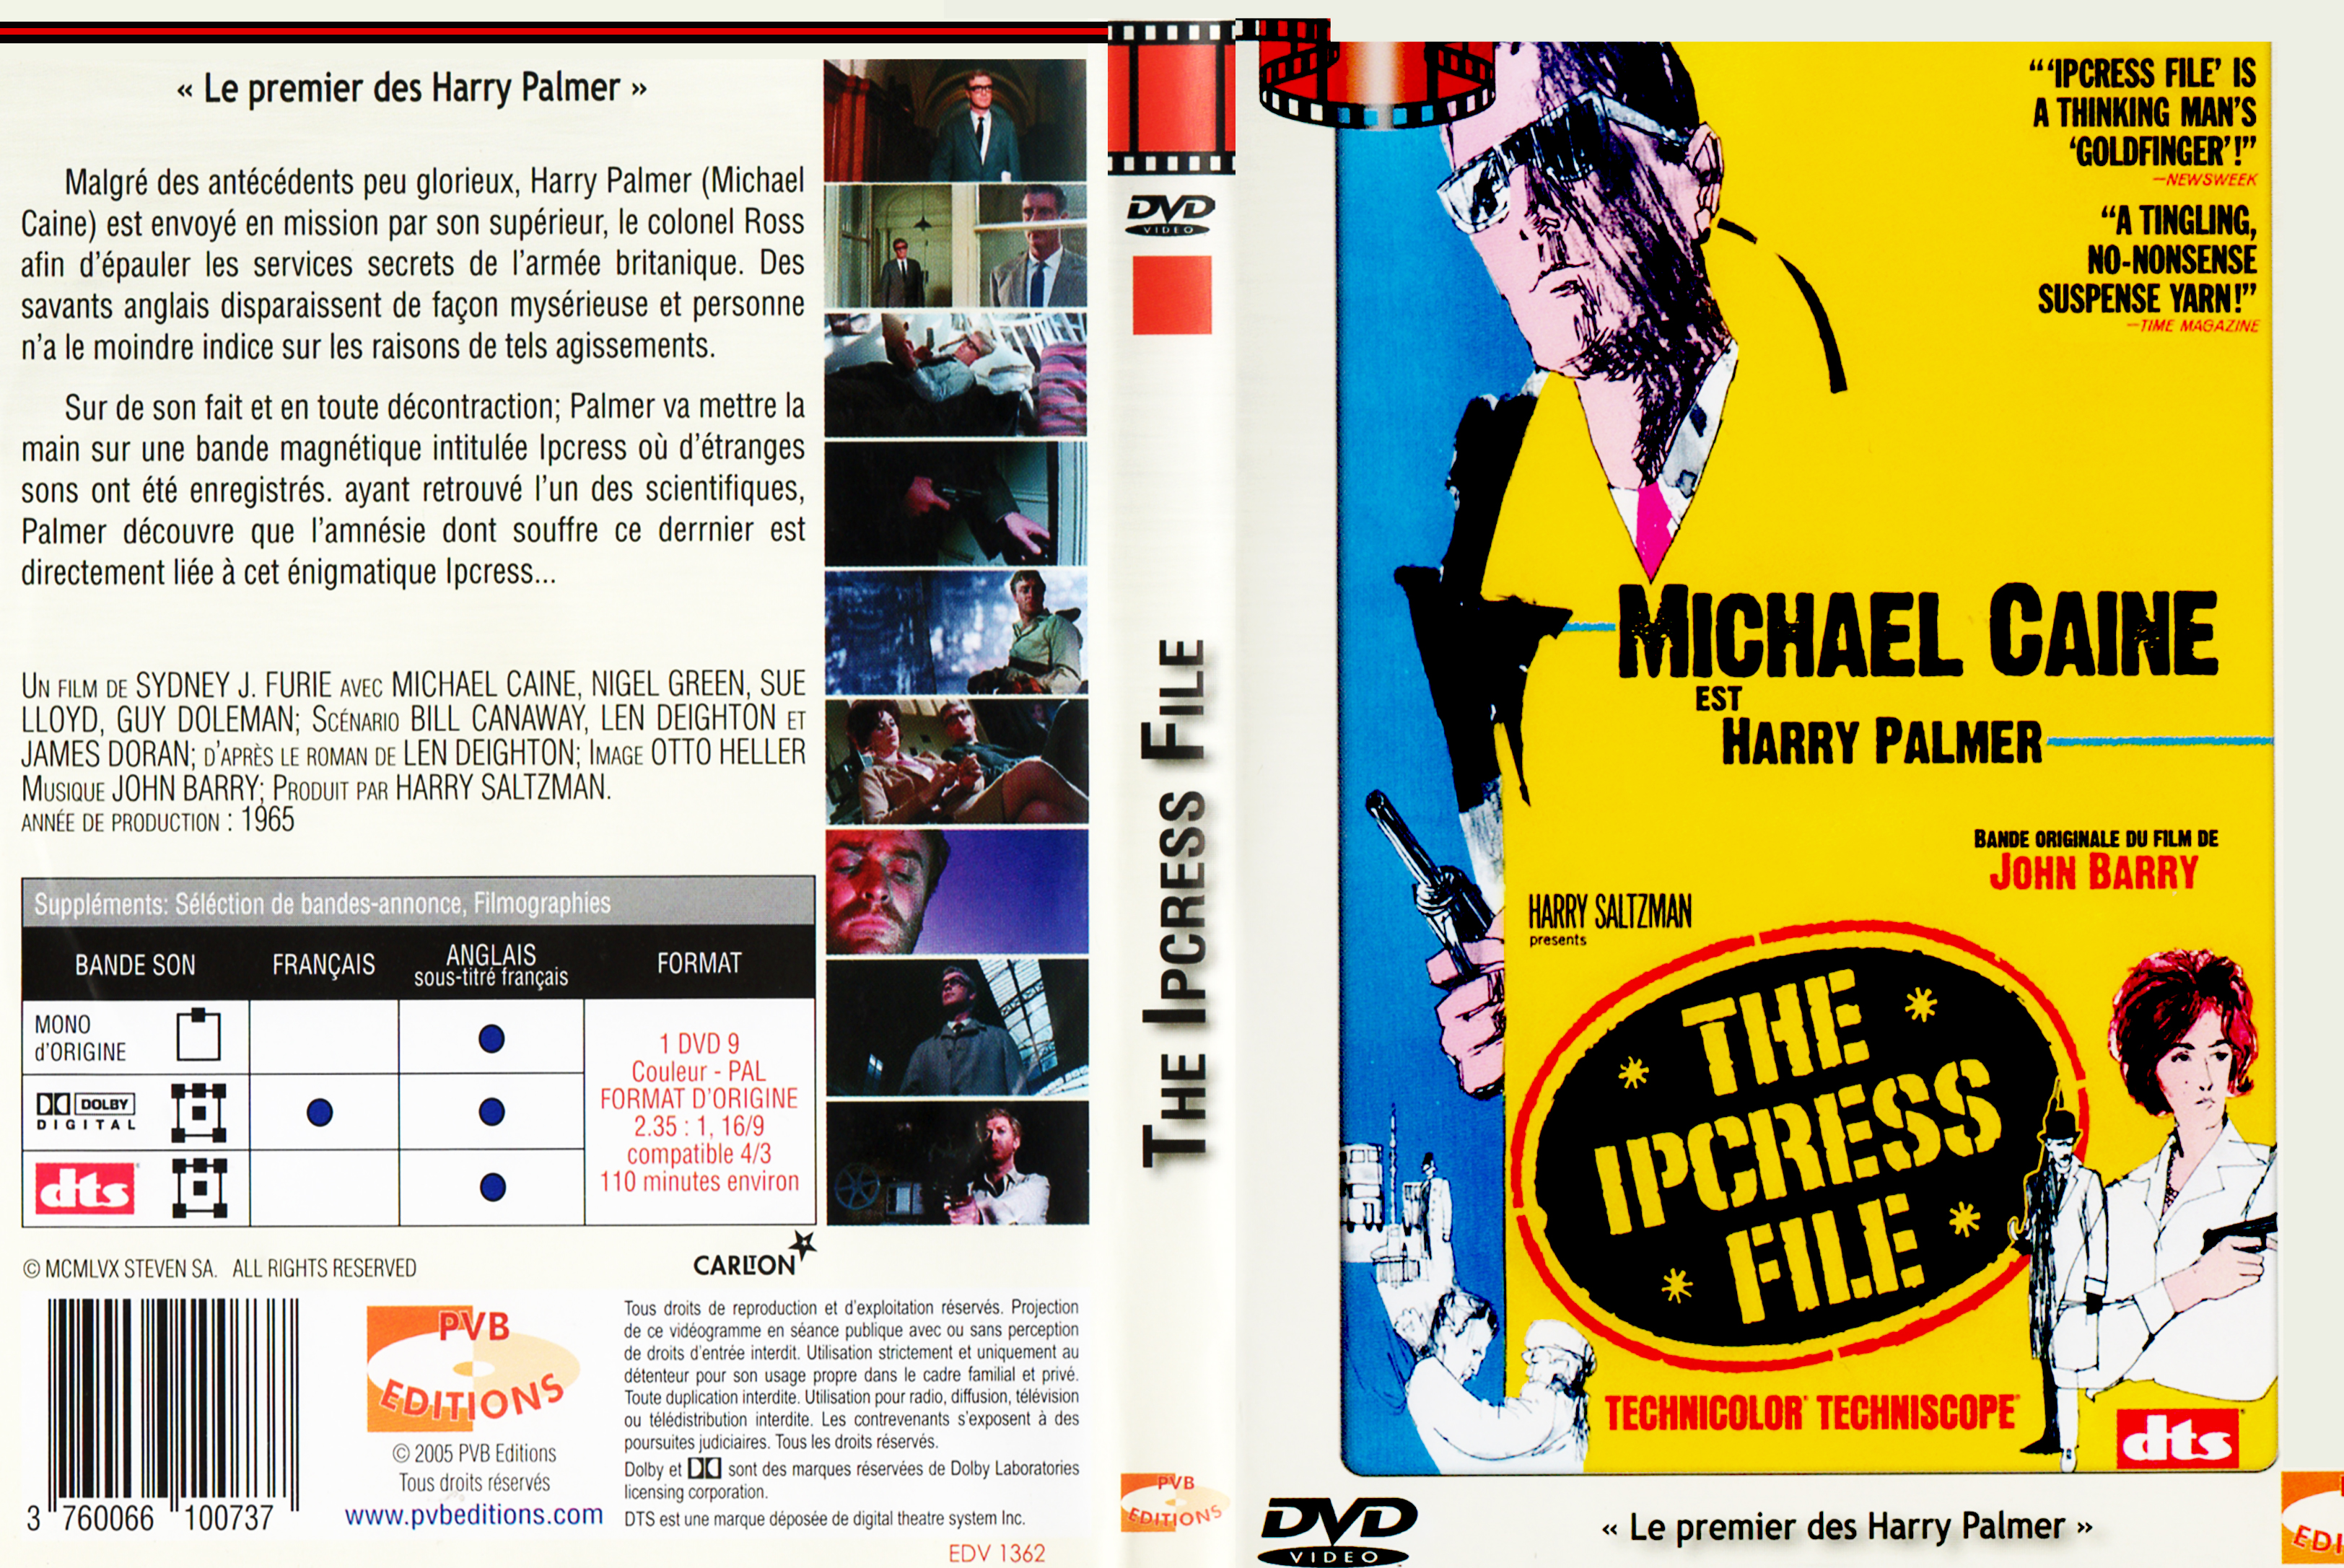 Jaquette DVD The ipcress file